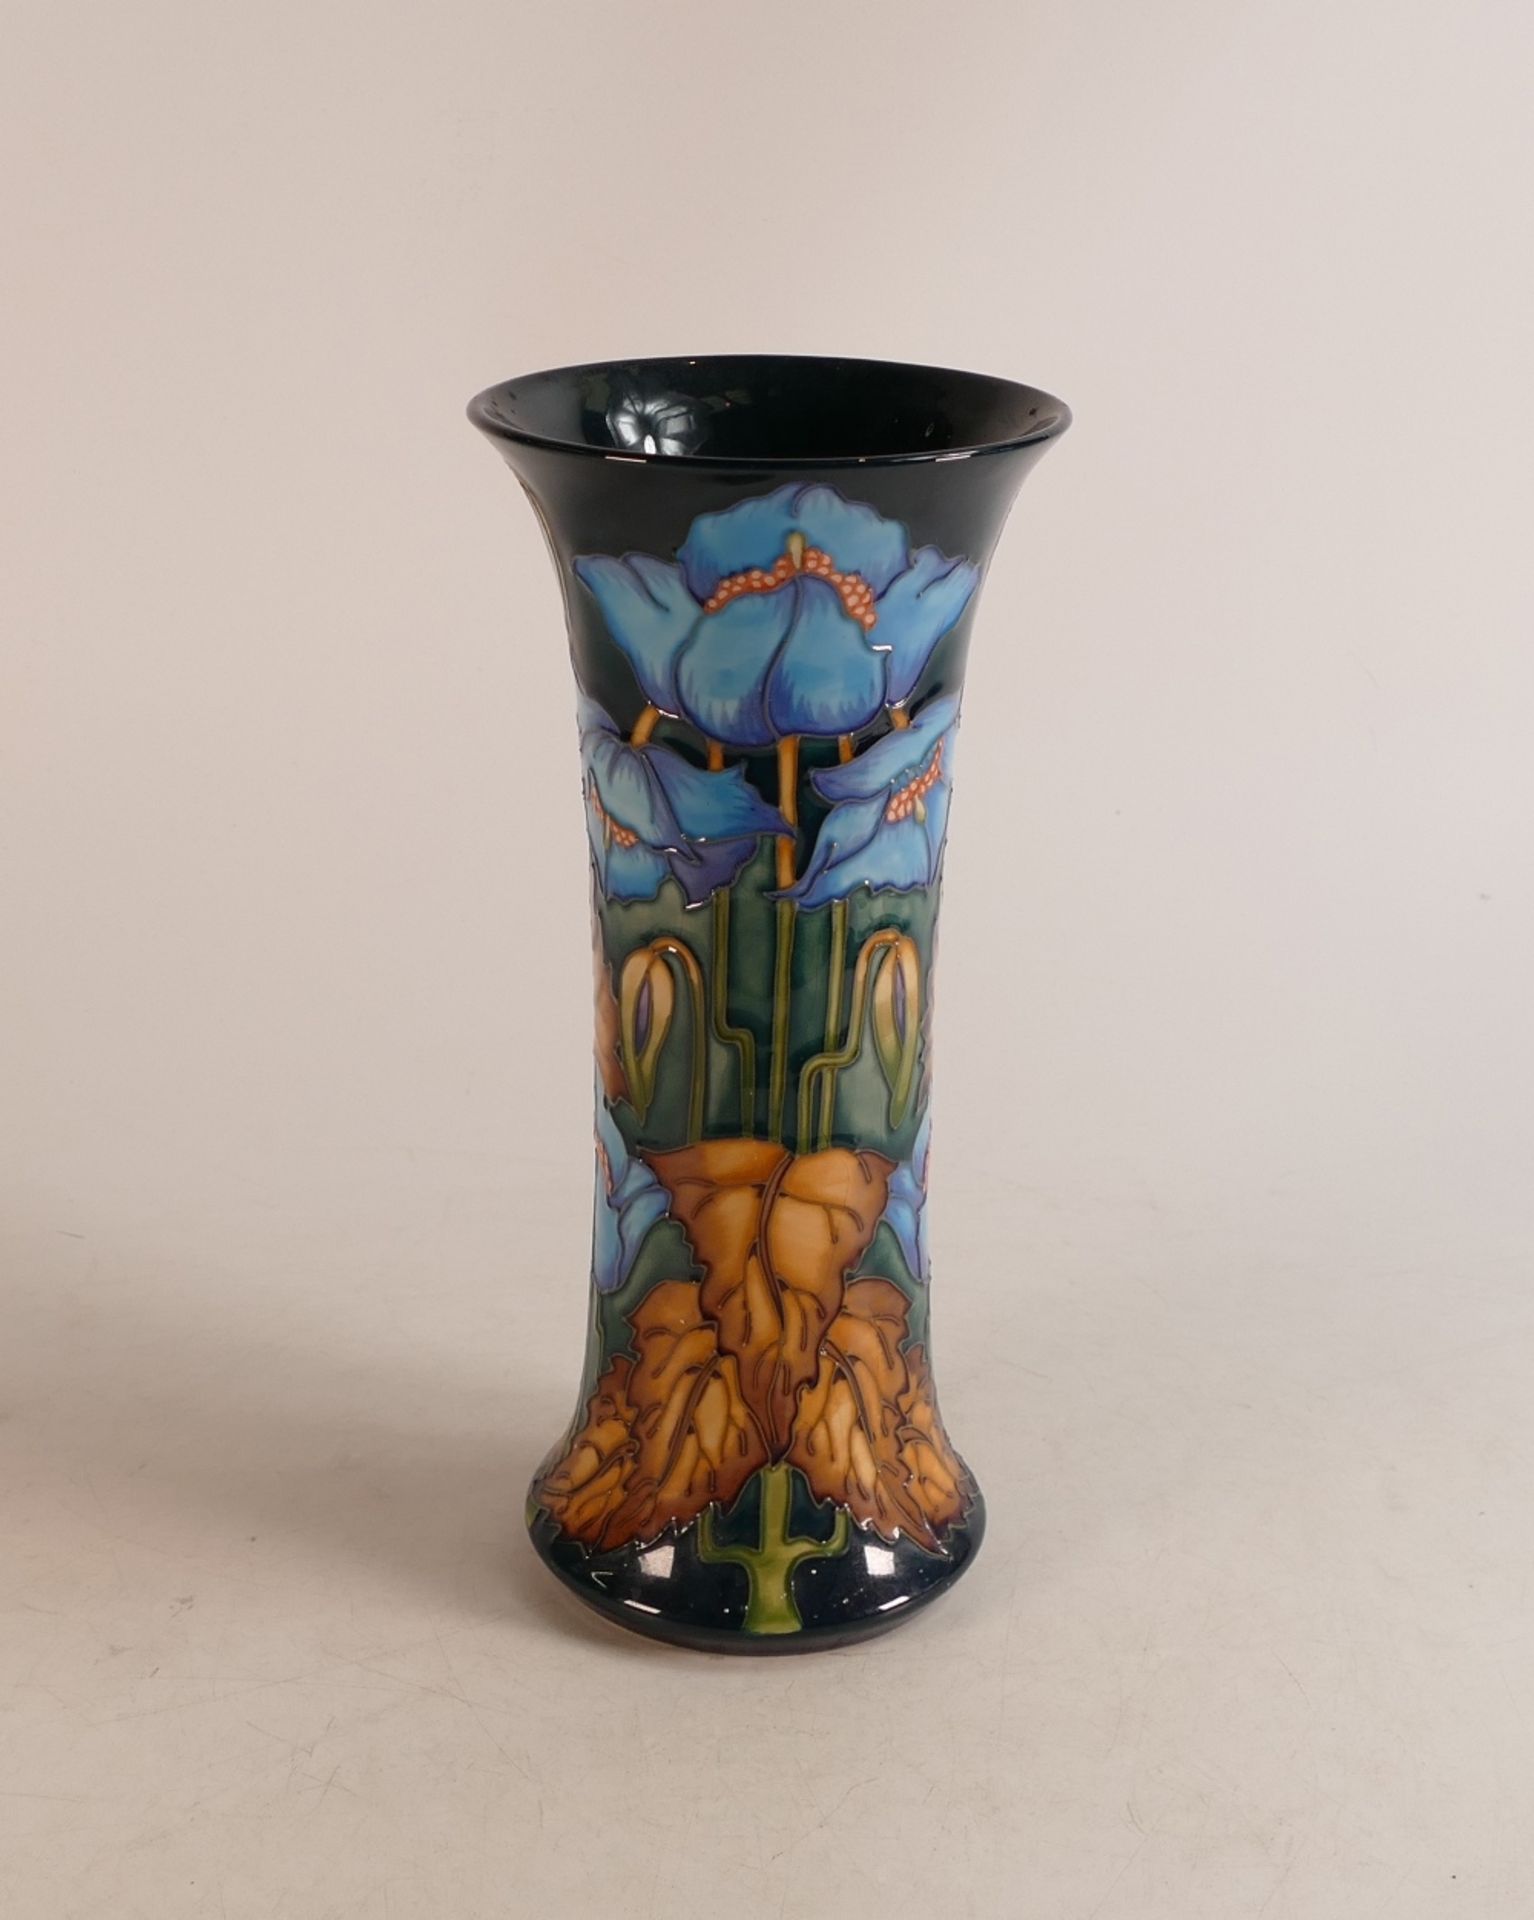 Moorcroft Blue Rhapsody vase . M.C.C piece signed by Philip Gibson, dated 2001. Height 25cm, crazed